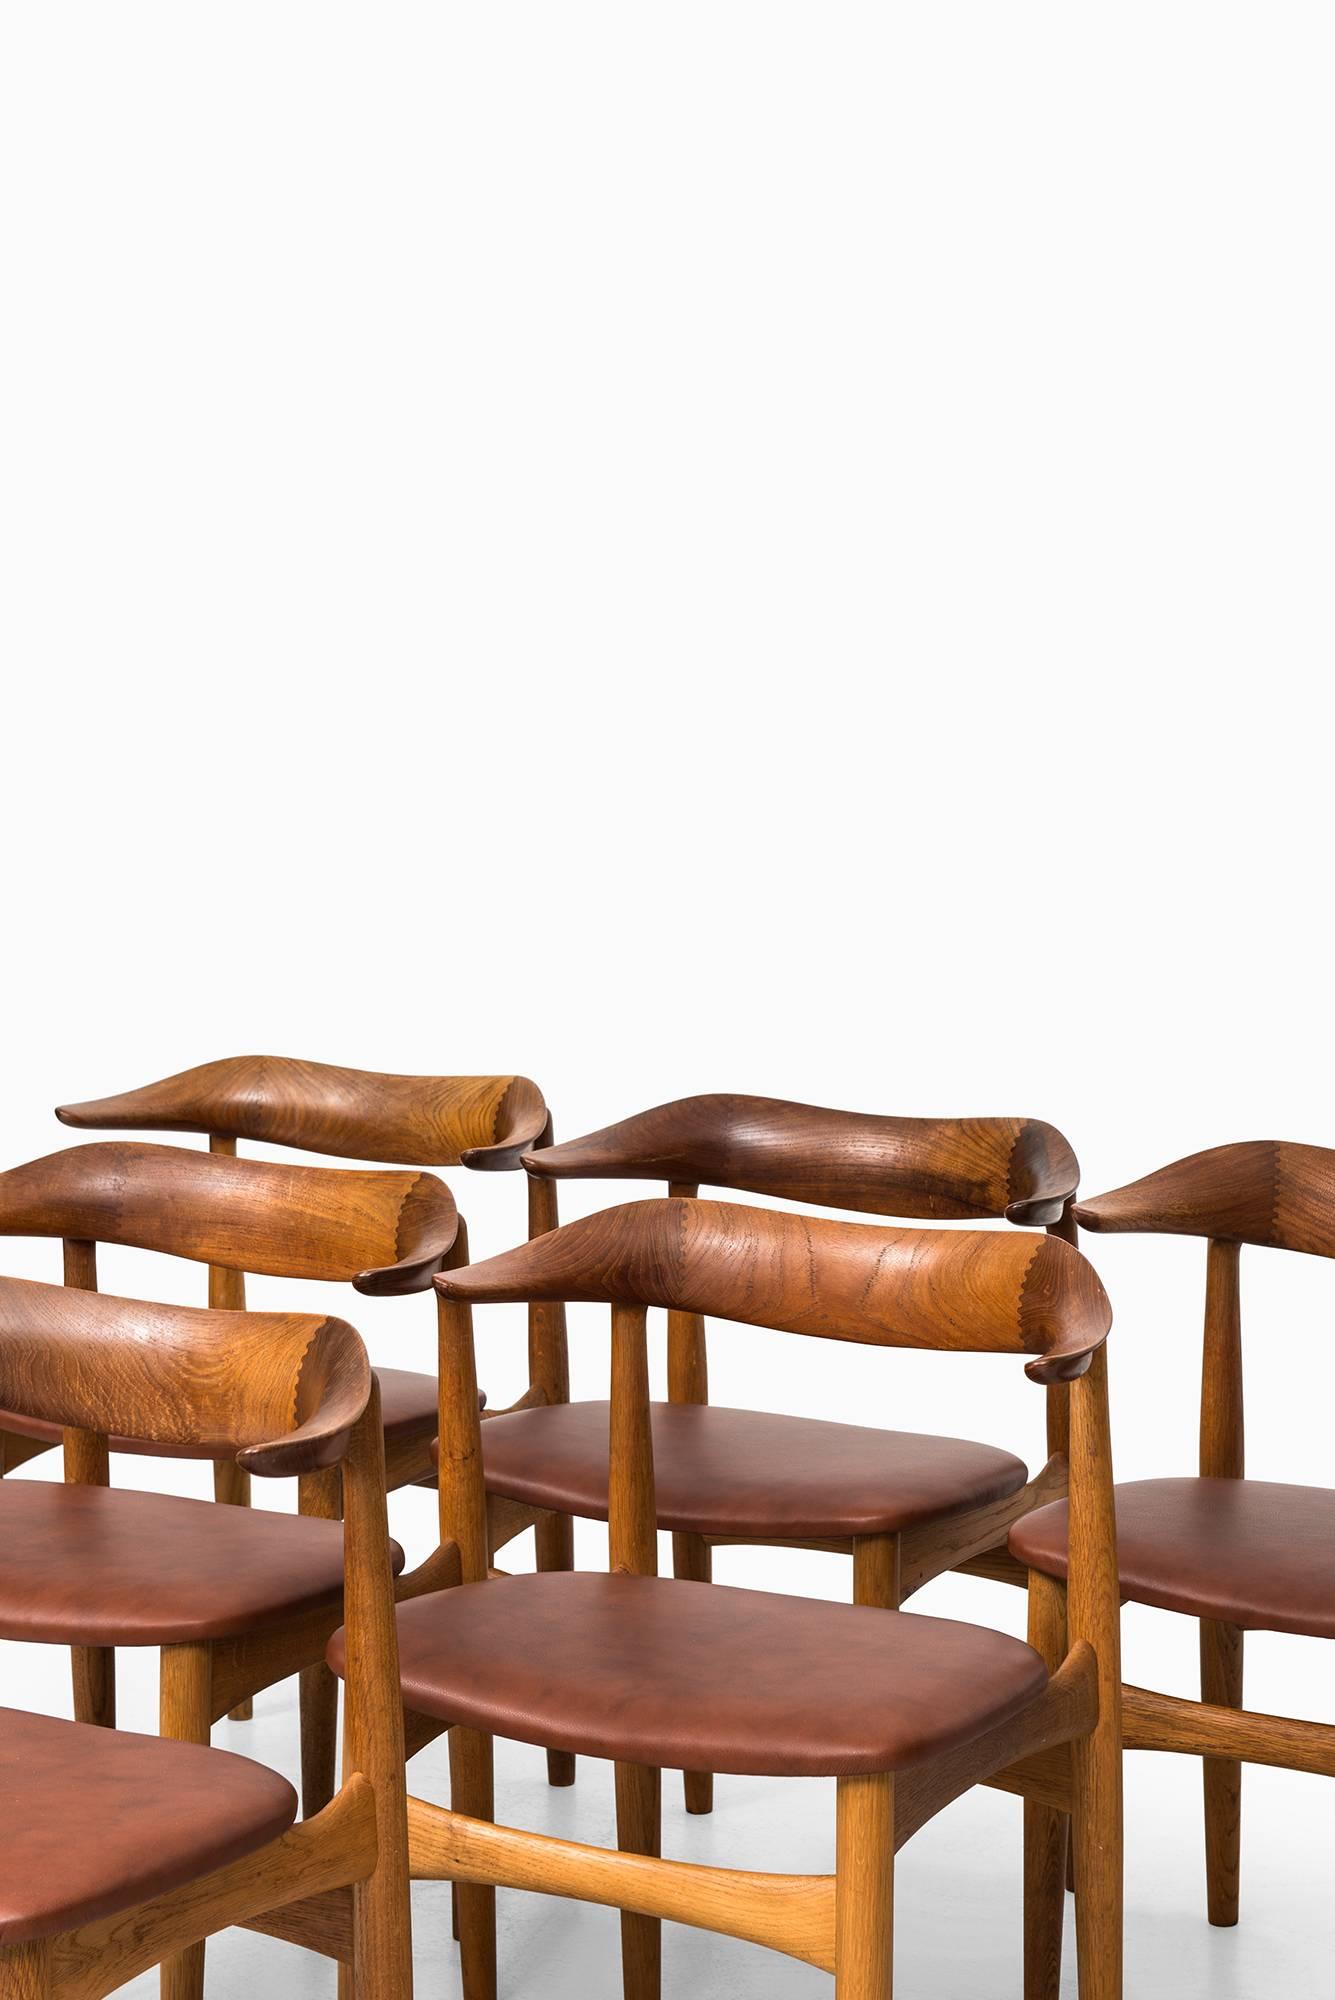 Rare set of six dining chairs model SM 521 / Cowhorn chair designed by Knud Faerch. Produced by Slagelse møbelfabrik in Denmark.